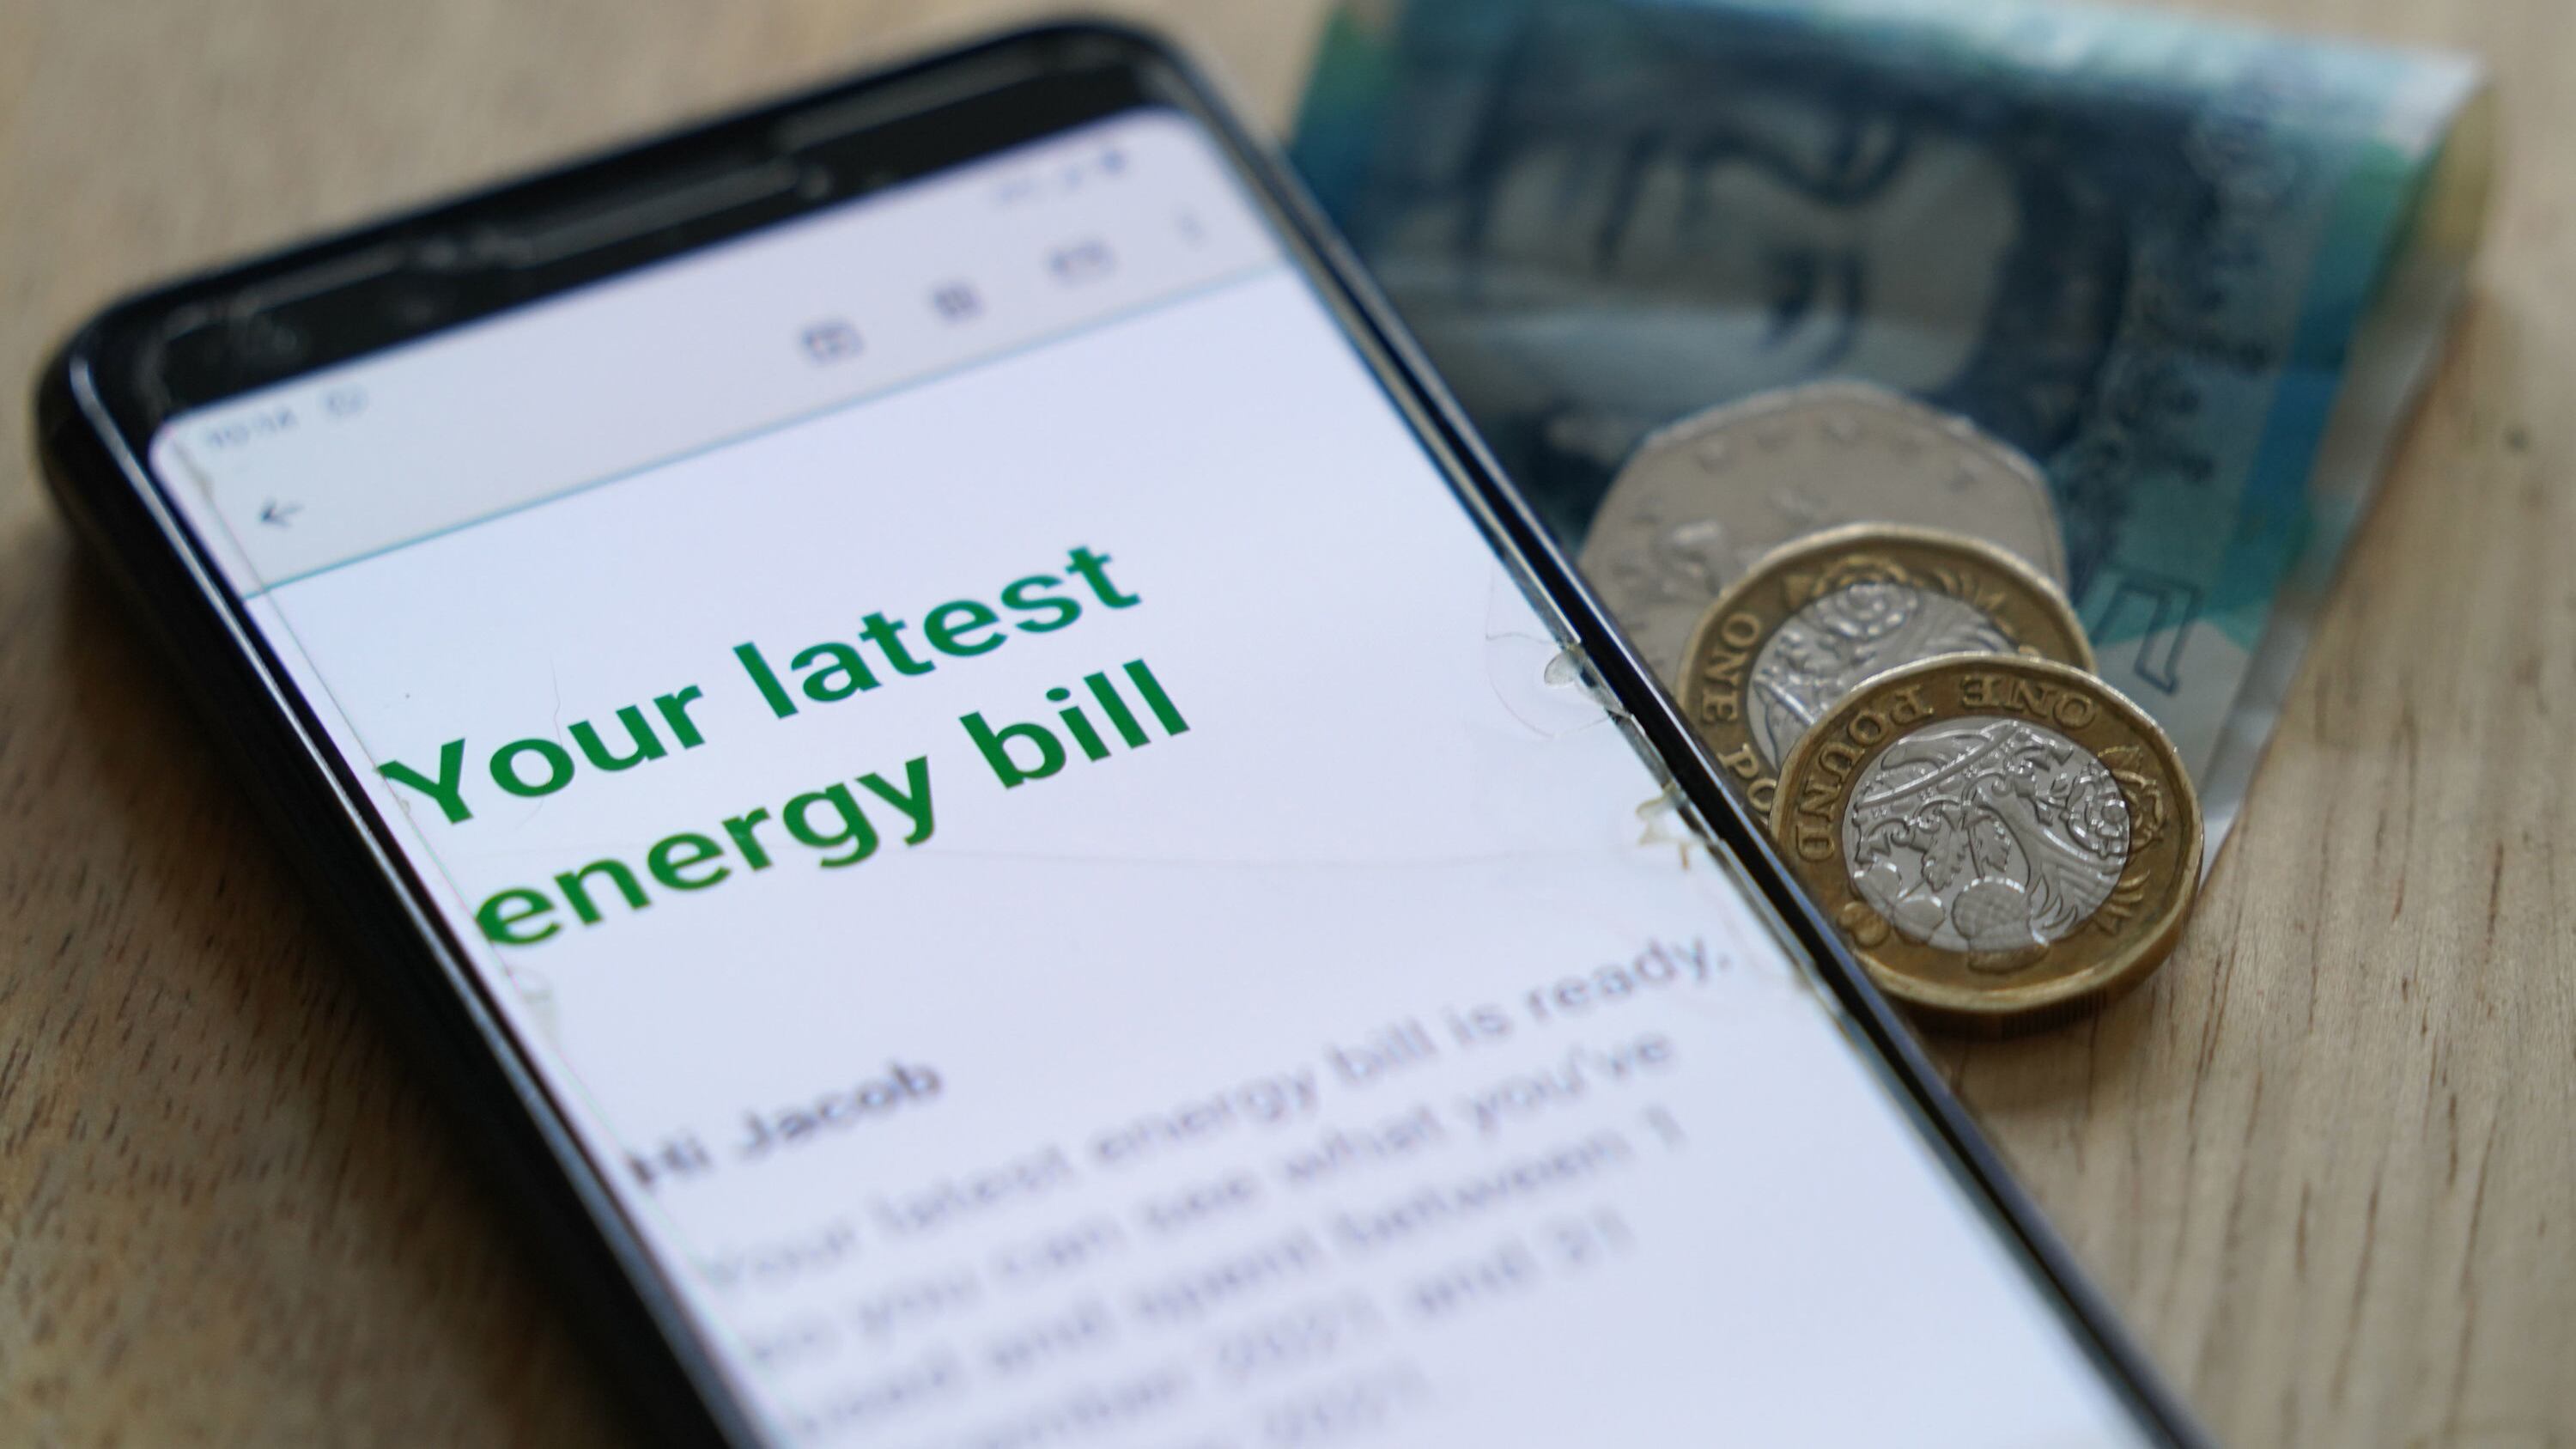 Regulators have introduced a series of reforms to energy supplier customer service of late